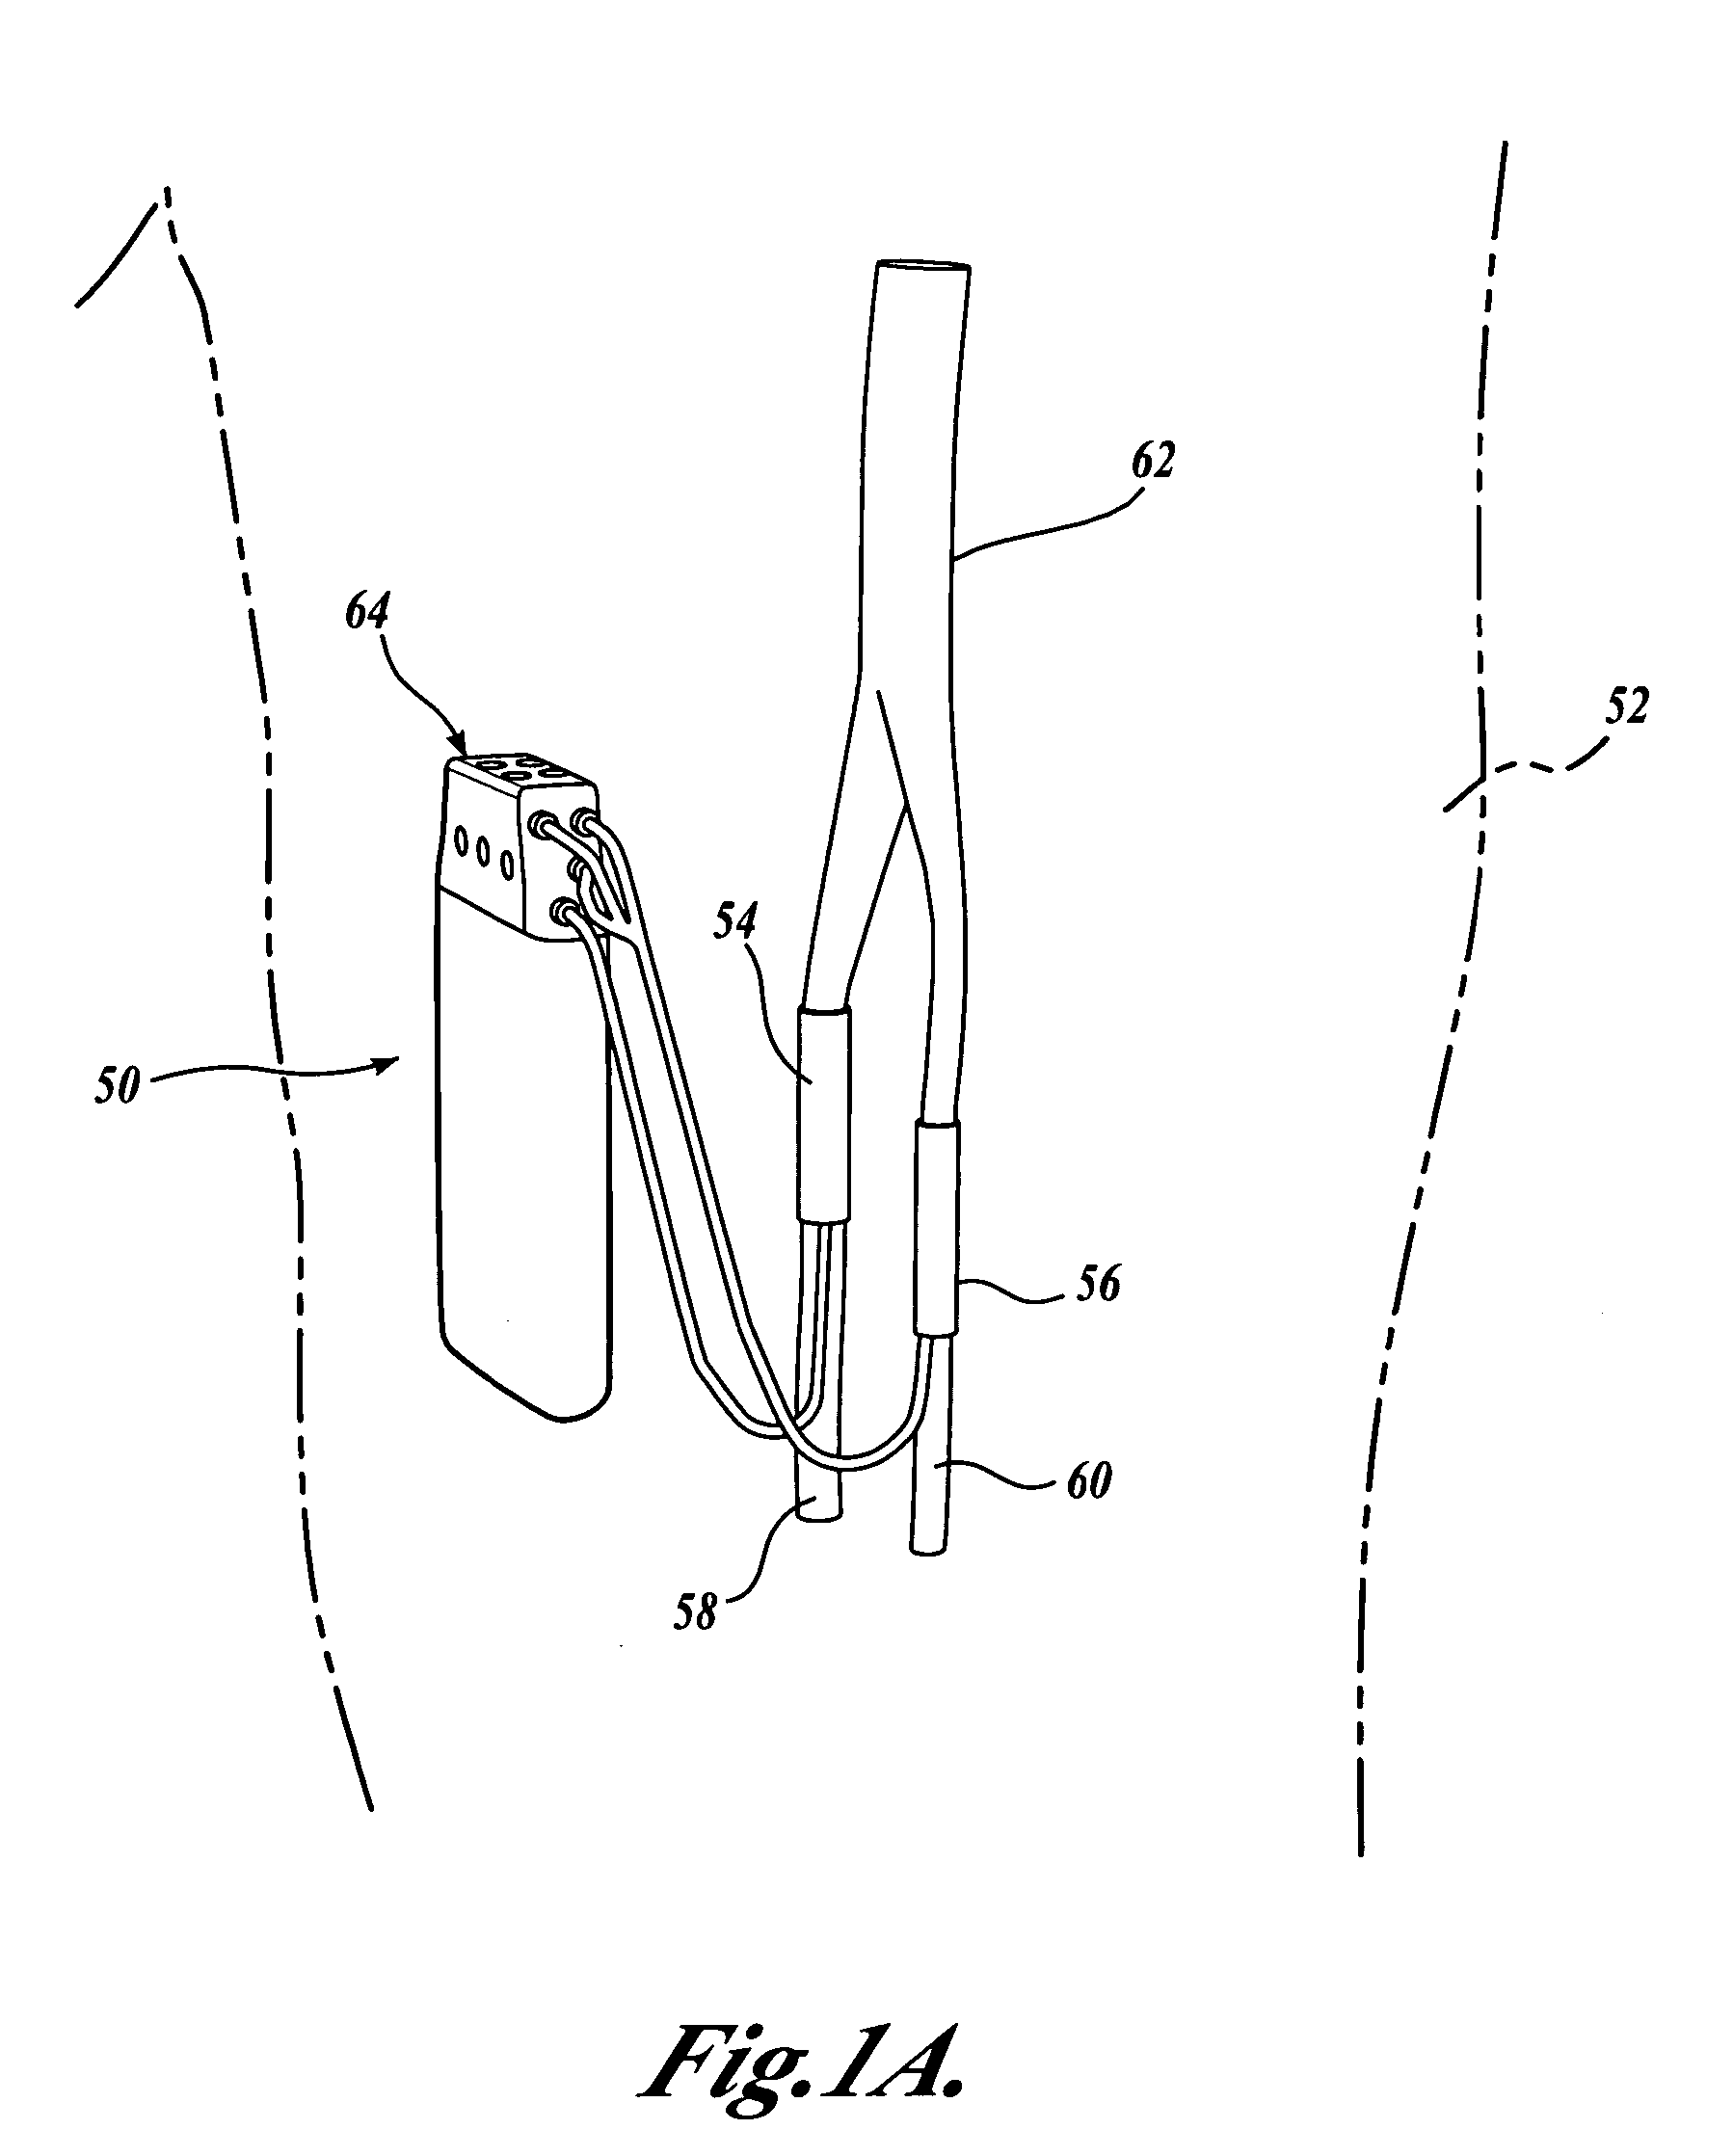 Fully implantable nerve signal sensing and stimulation device and method for treating foot drop and other neurological disorders